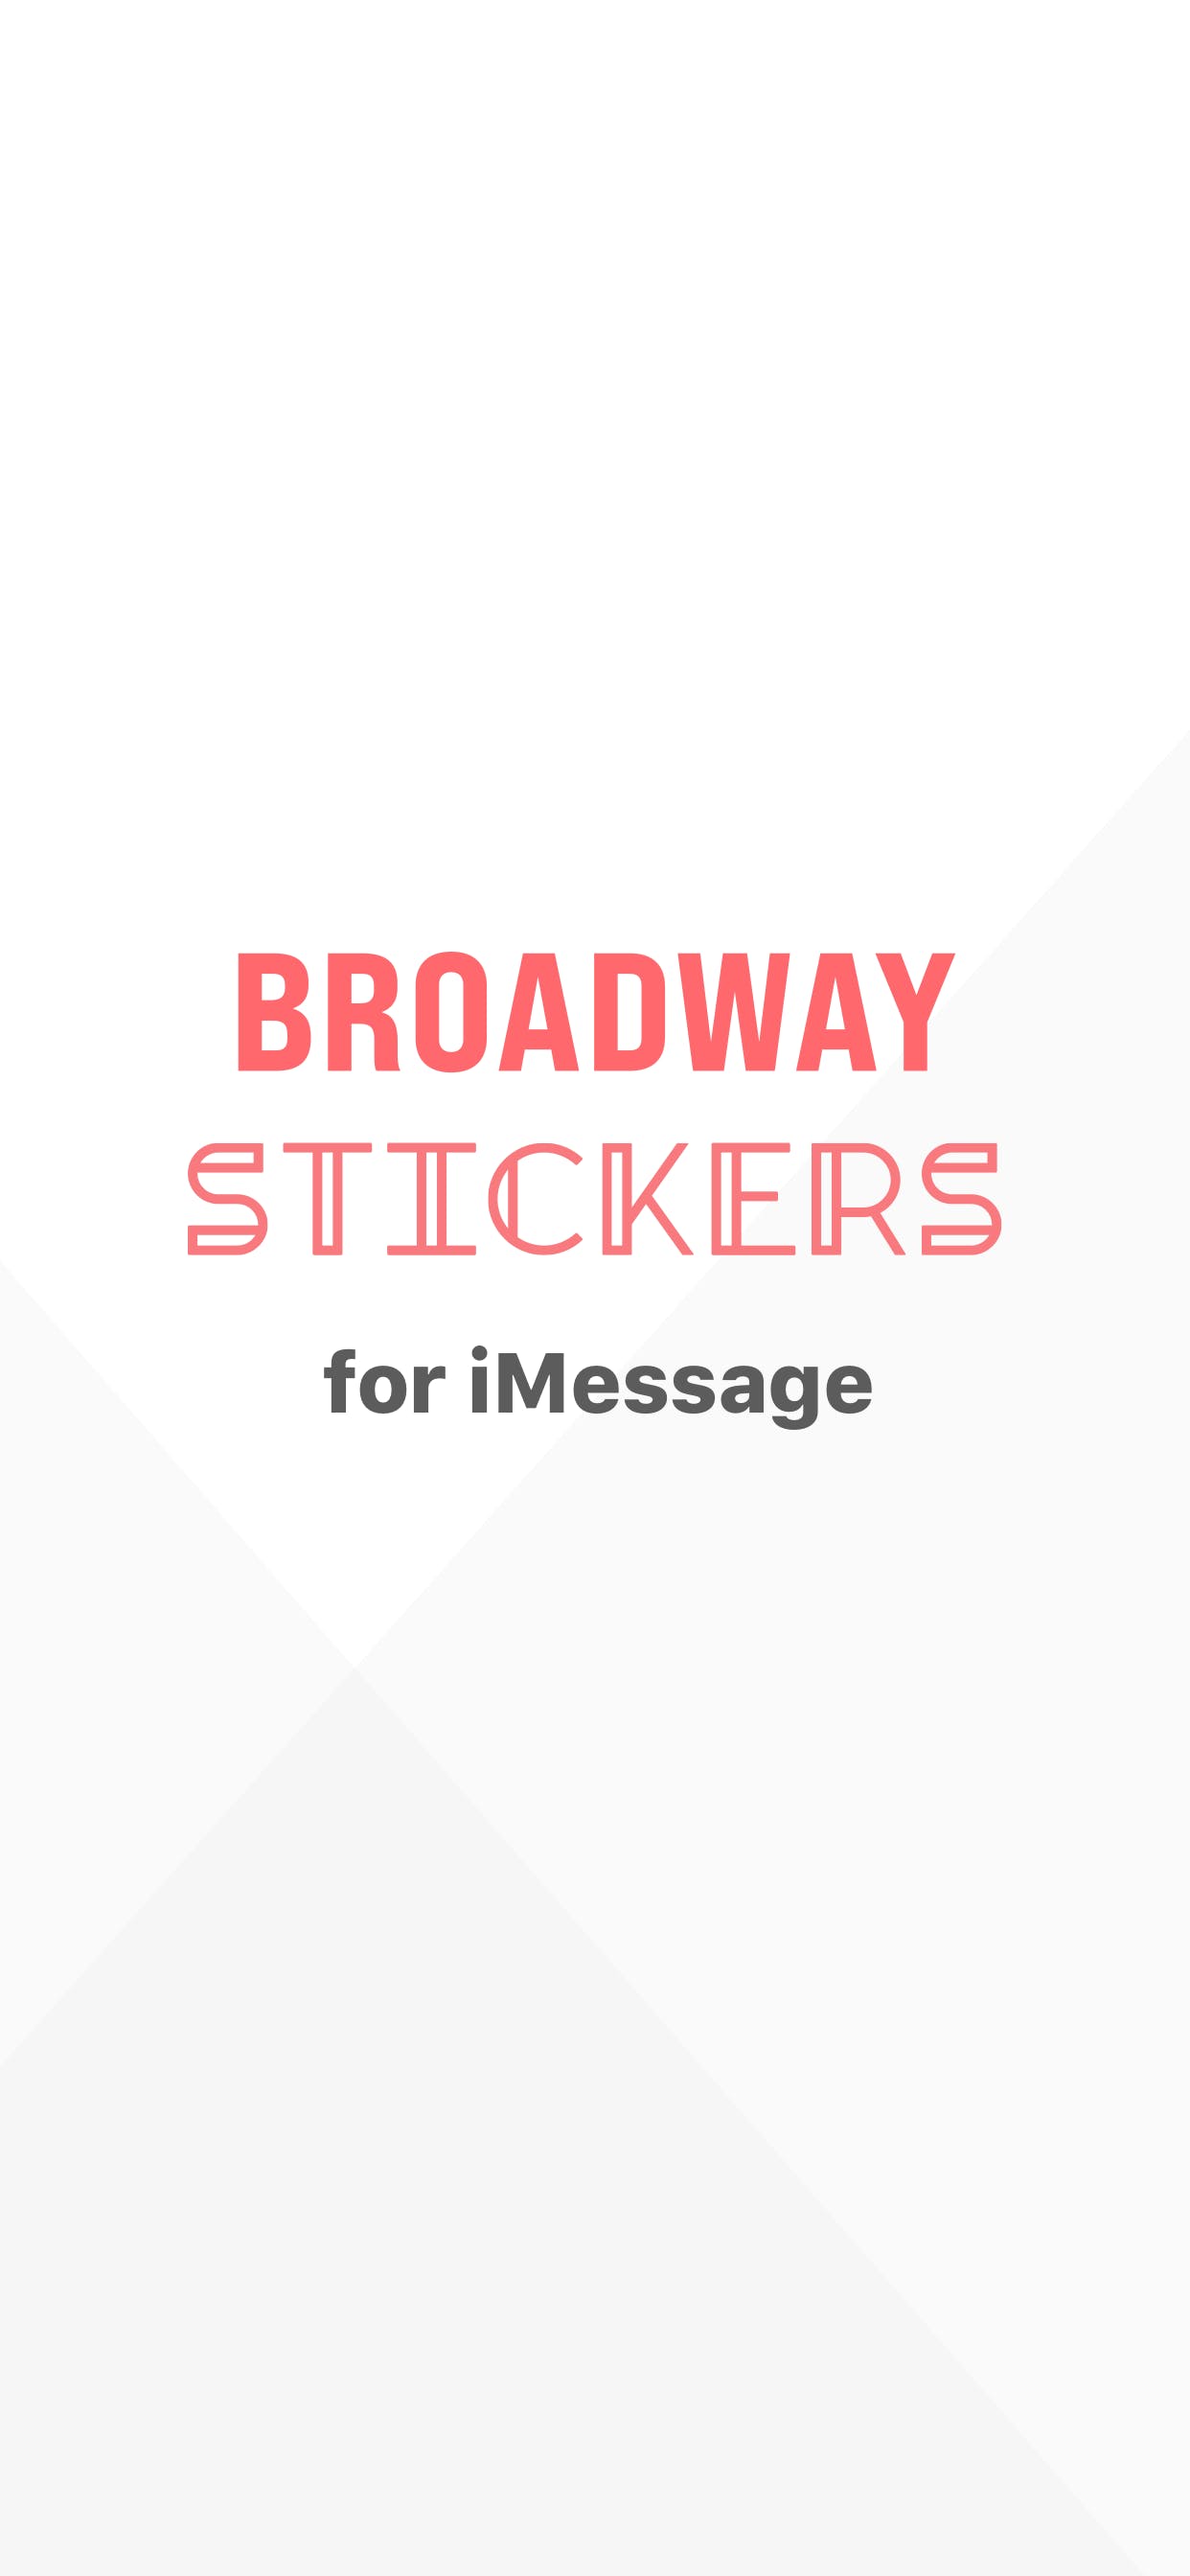 Broadway Stickers for iMessage media 1